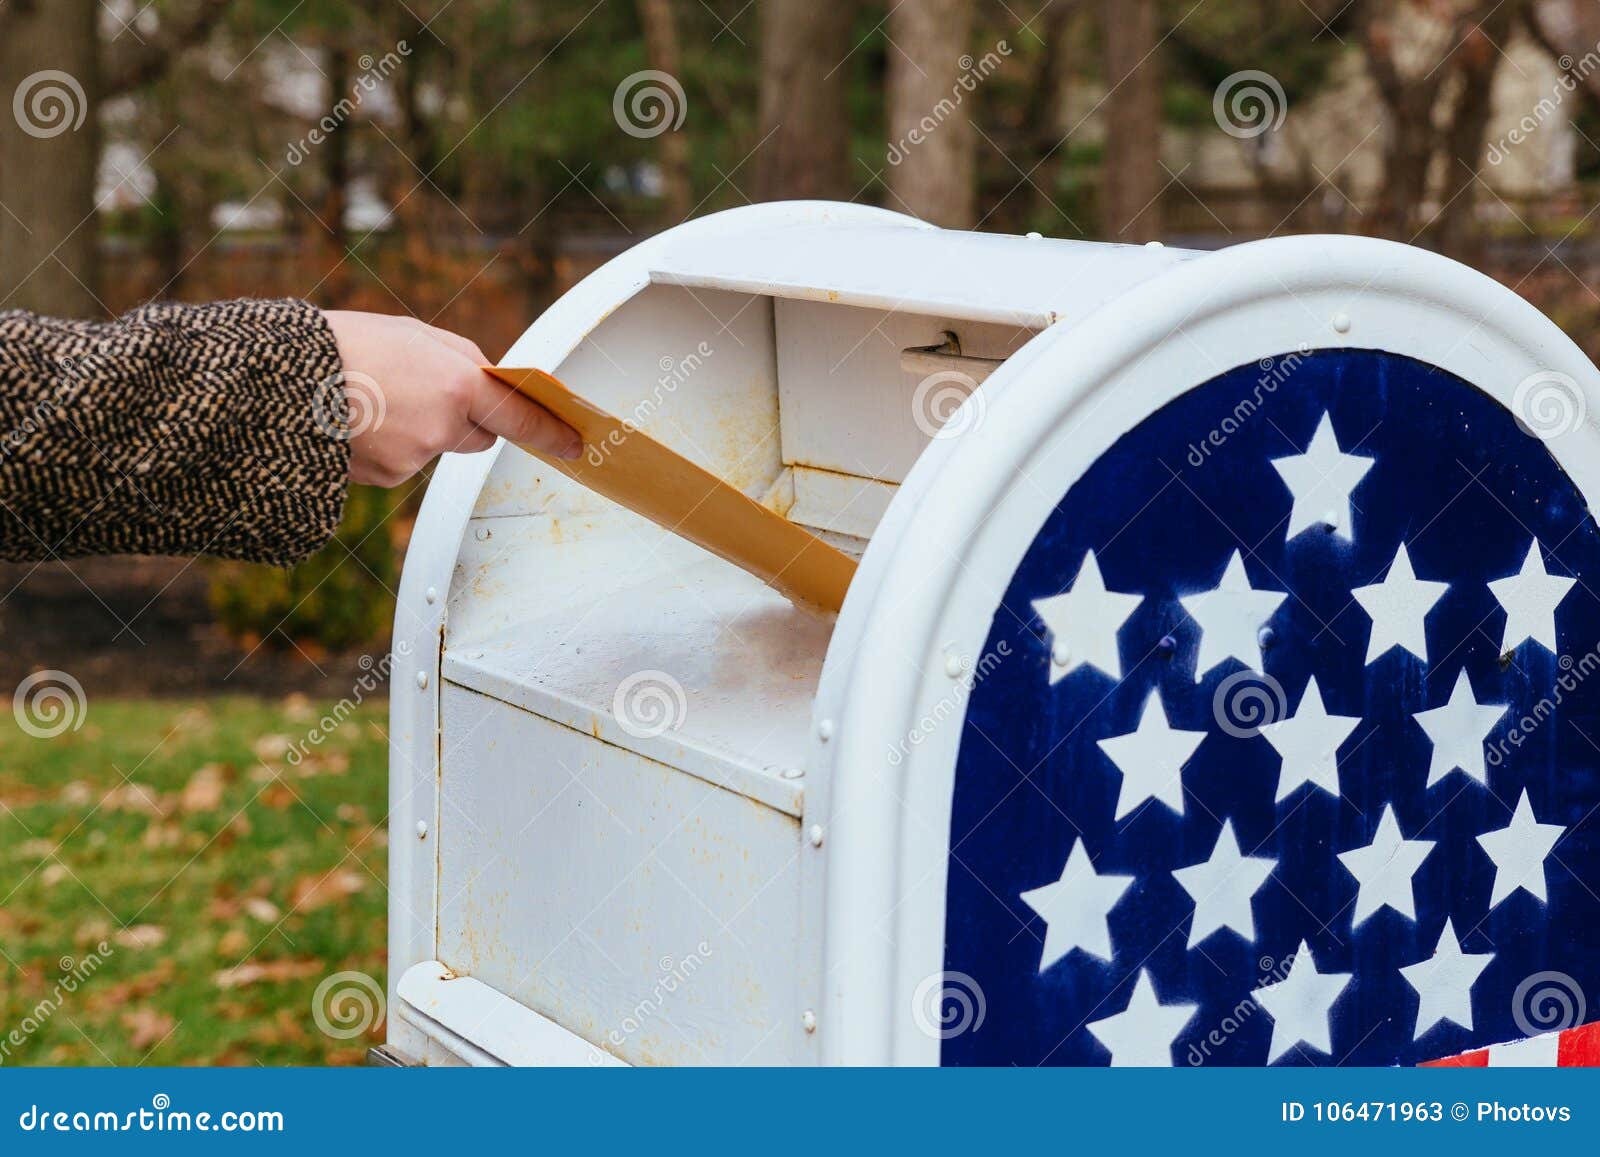 close-up of postman putting letters mailbox american flag